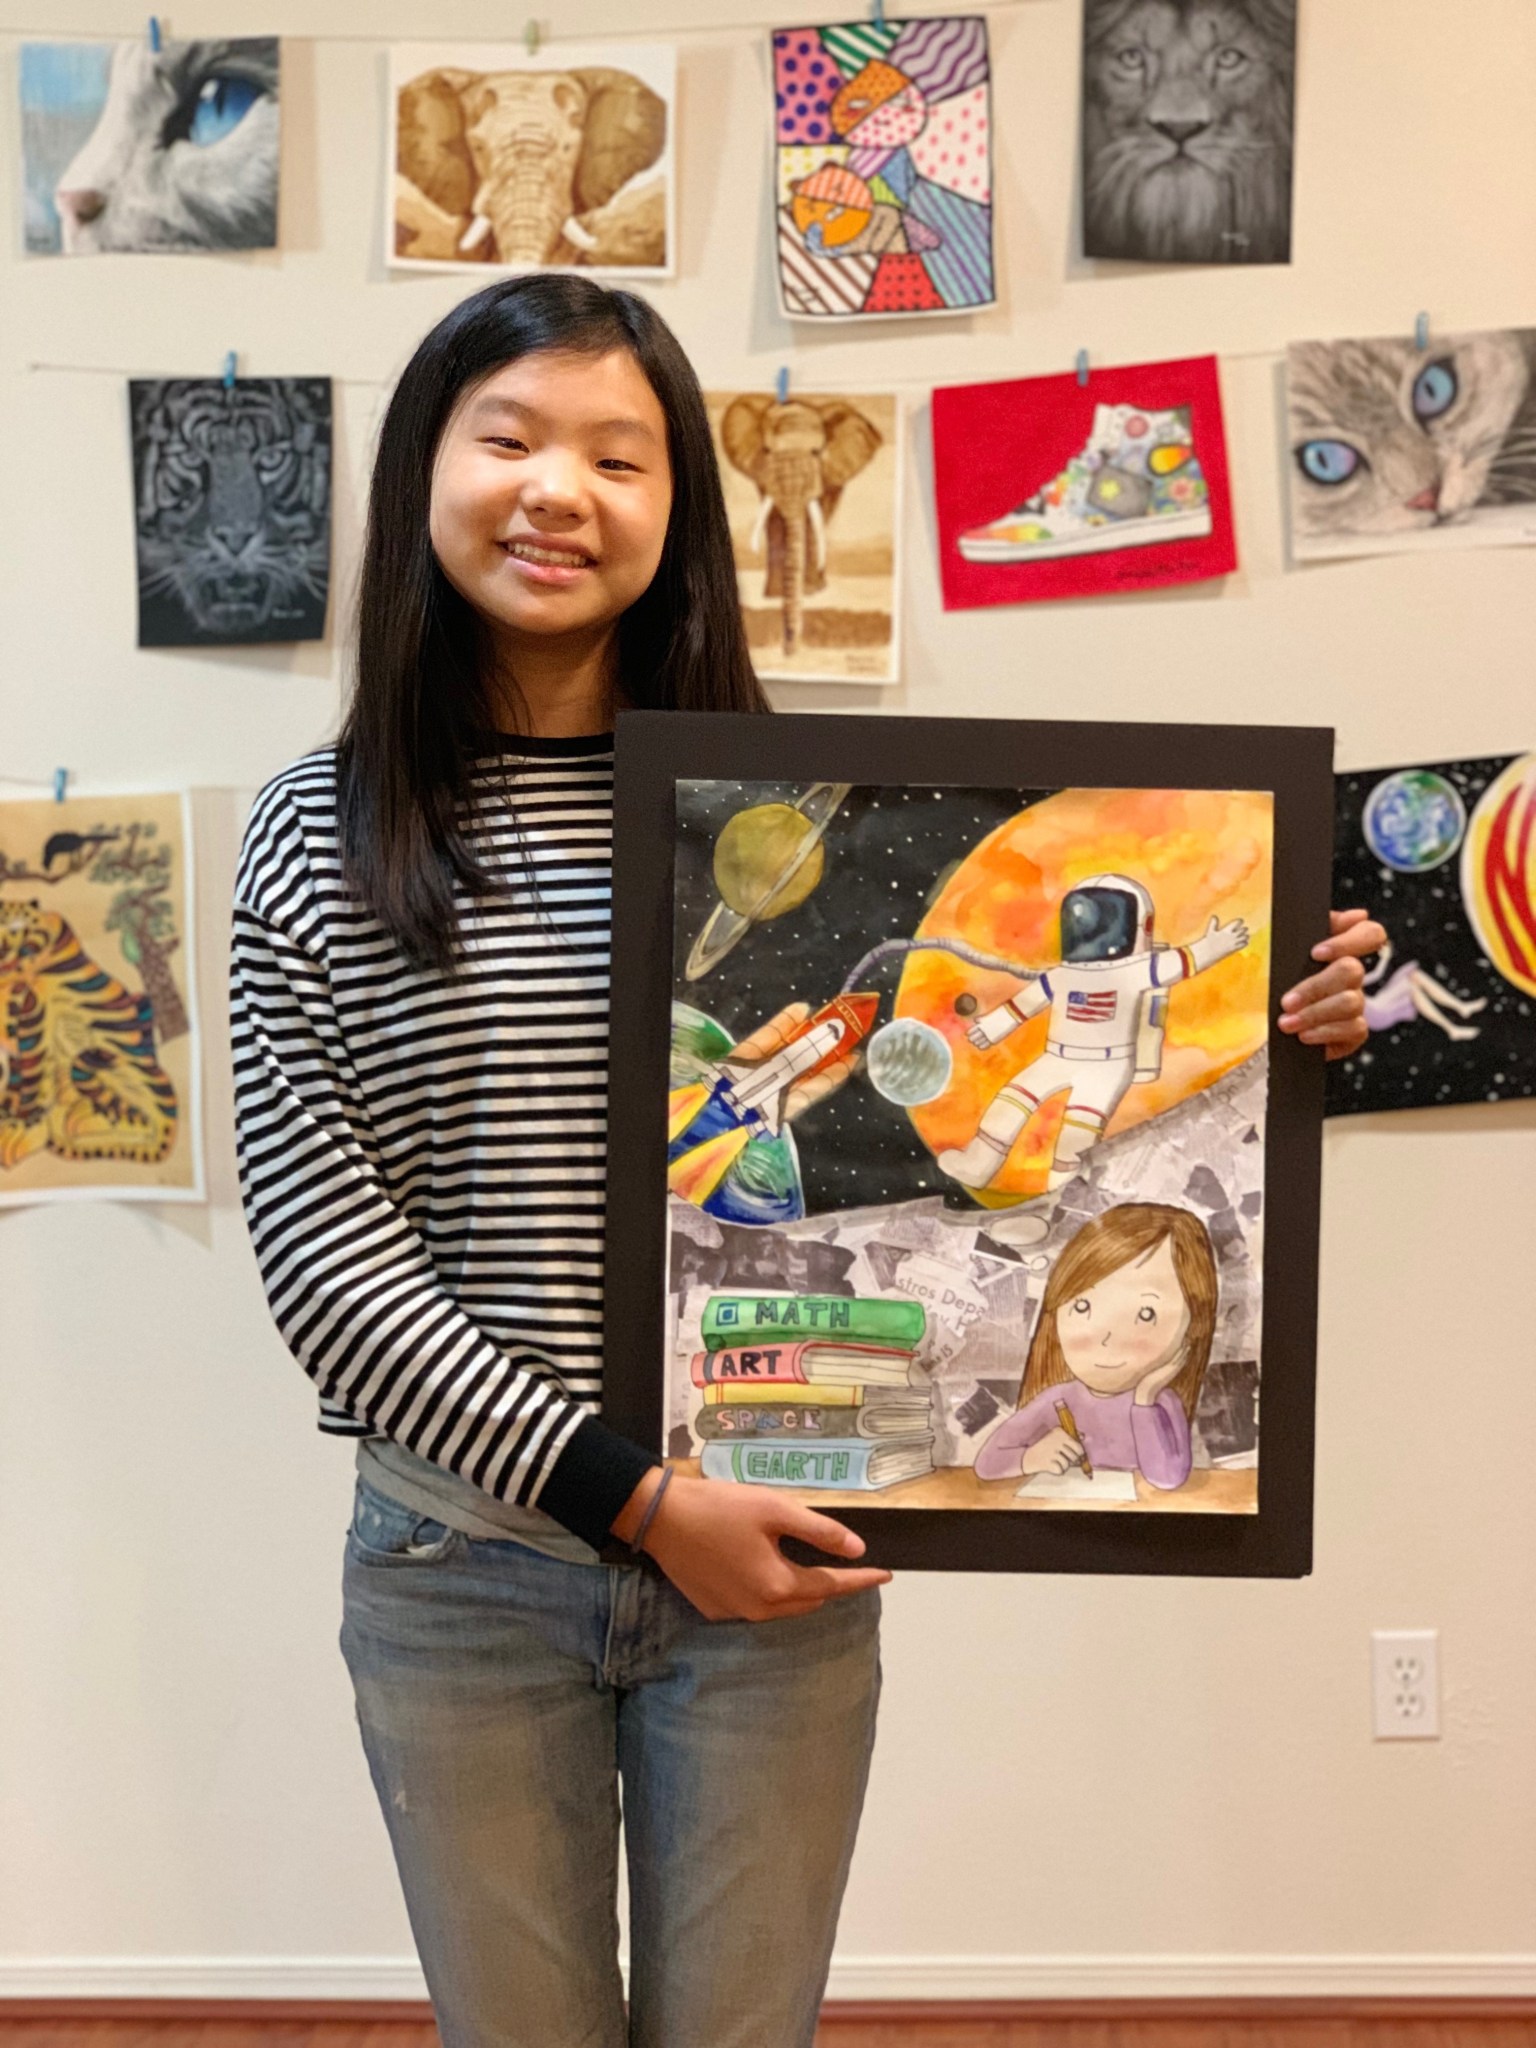 Roa Lee, who attends Cope Middle School in Redlands, California, was a first-time entrant in the annual competition.